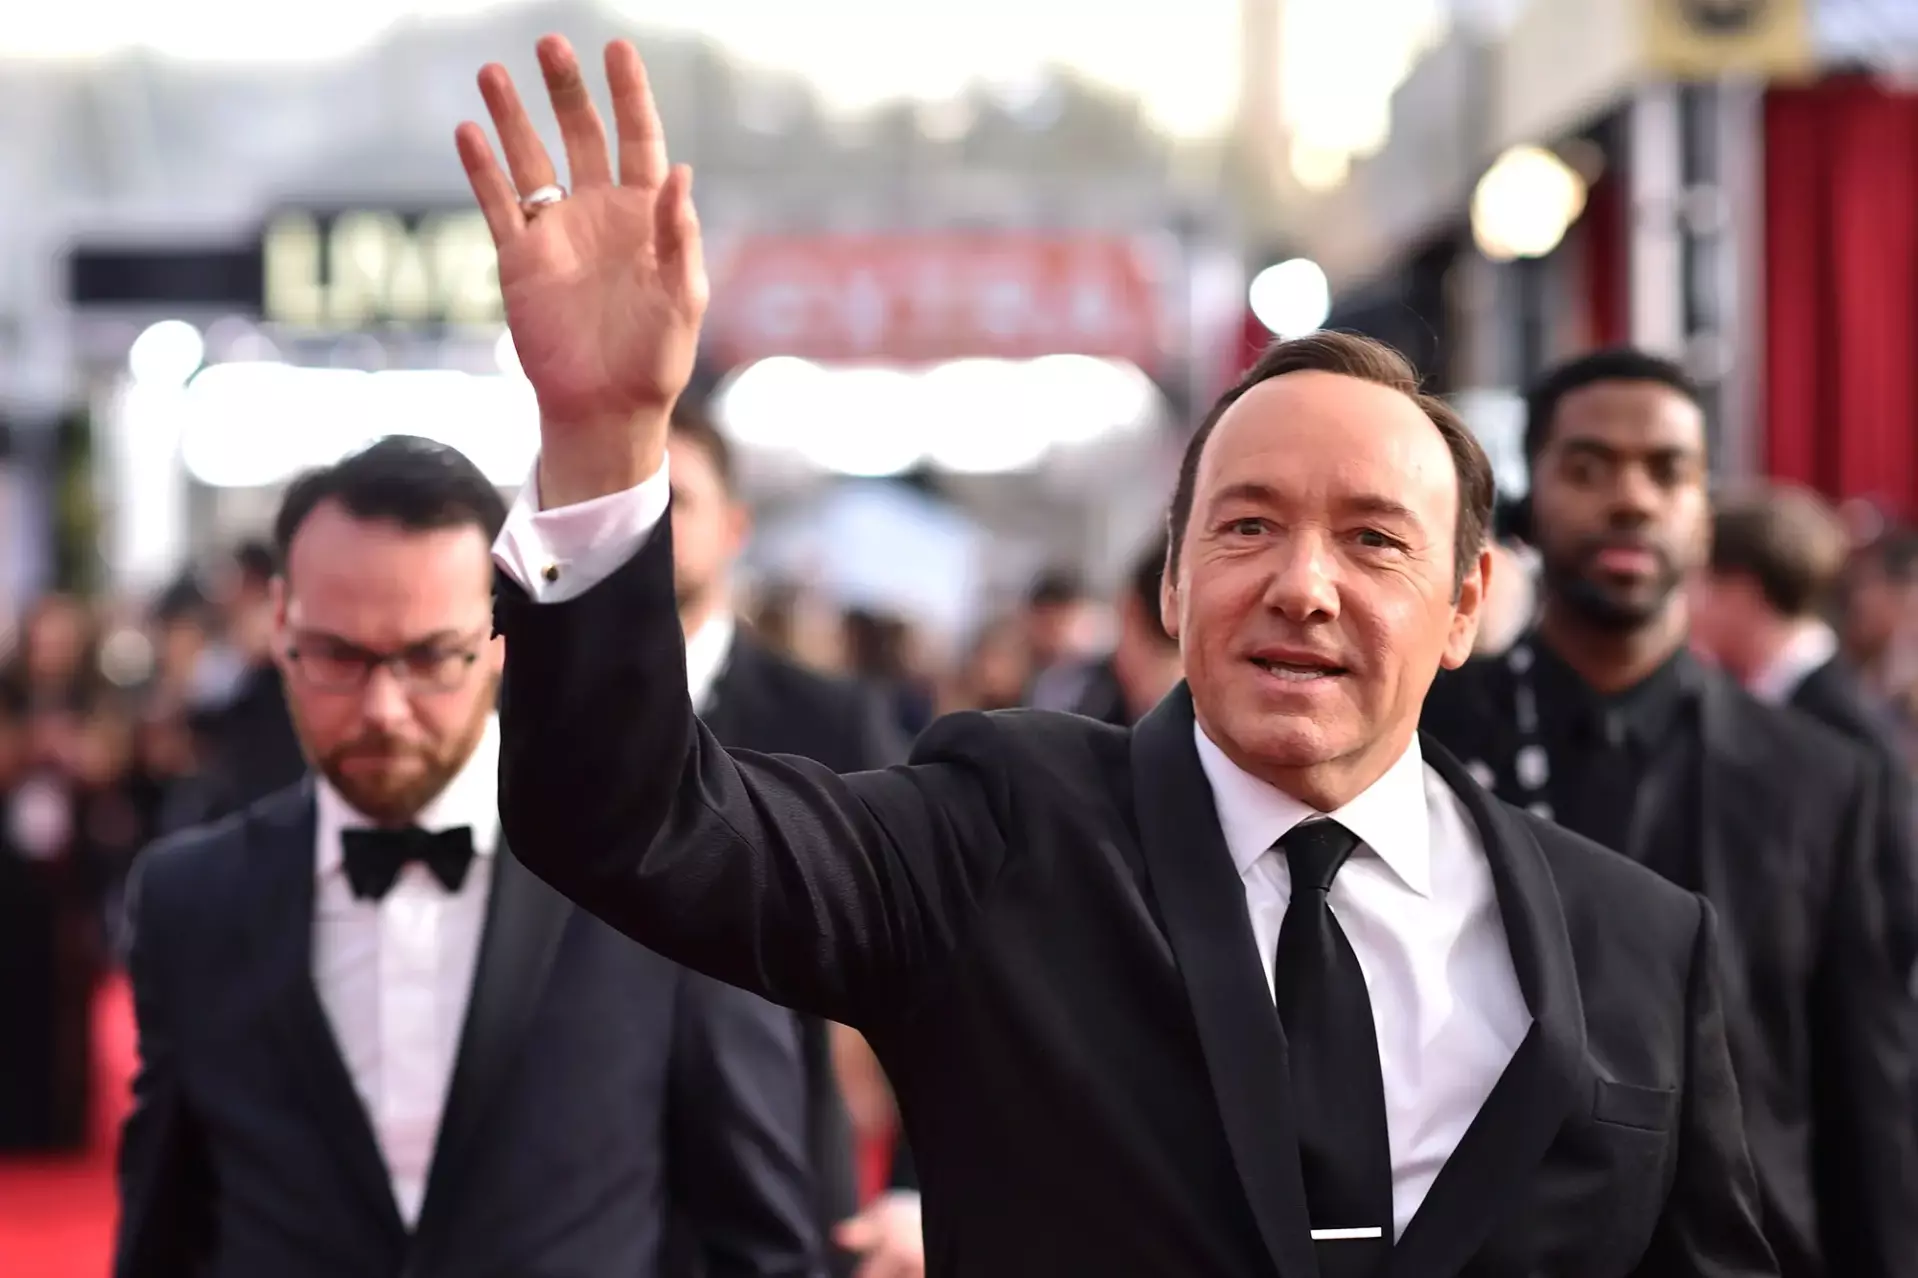 Kevin Spacey is one of the famous actors in the 1990s